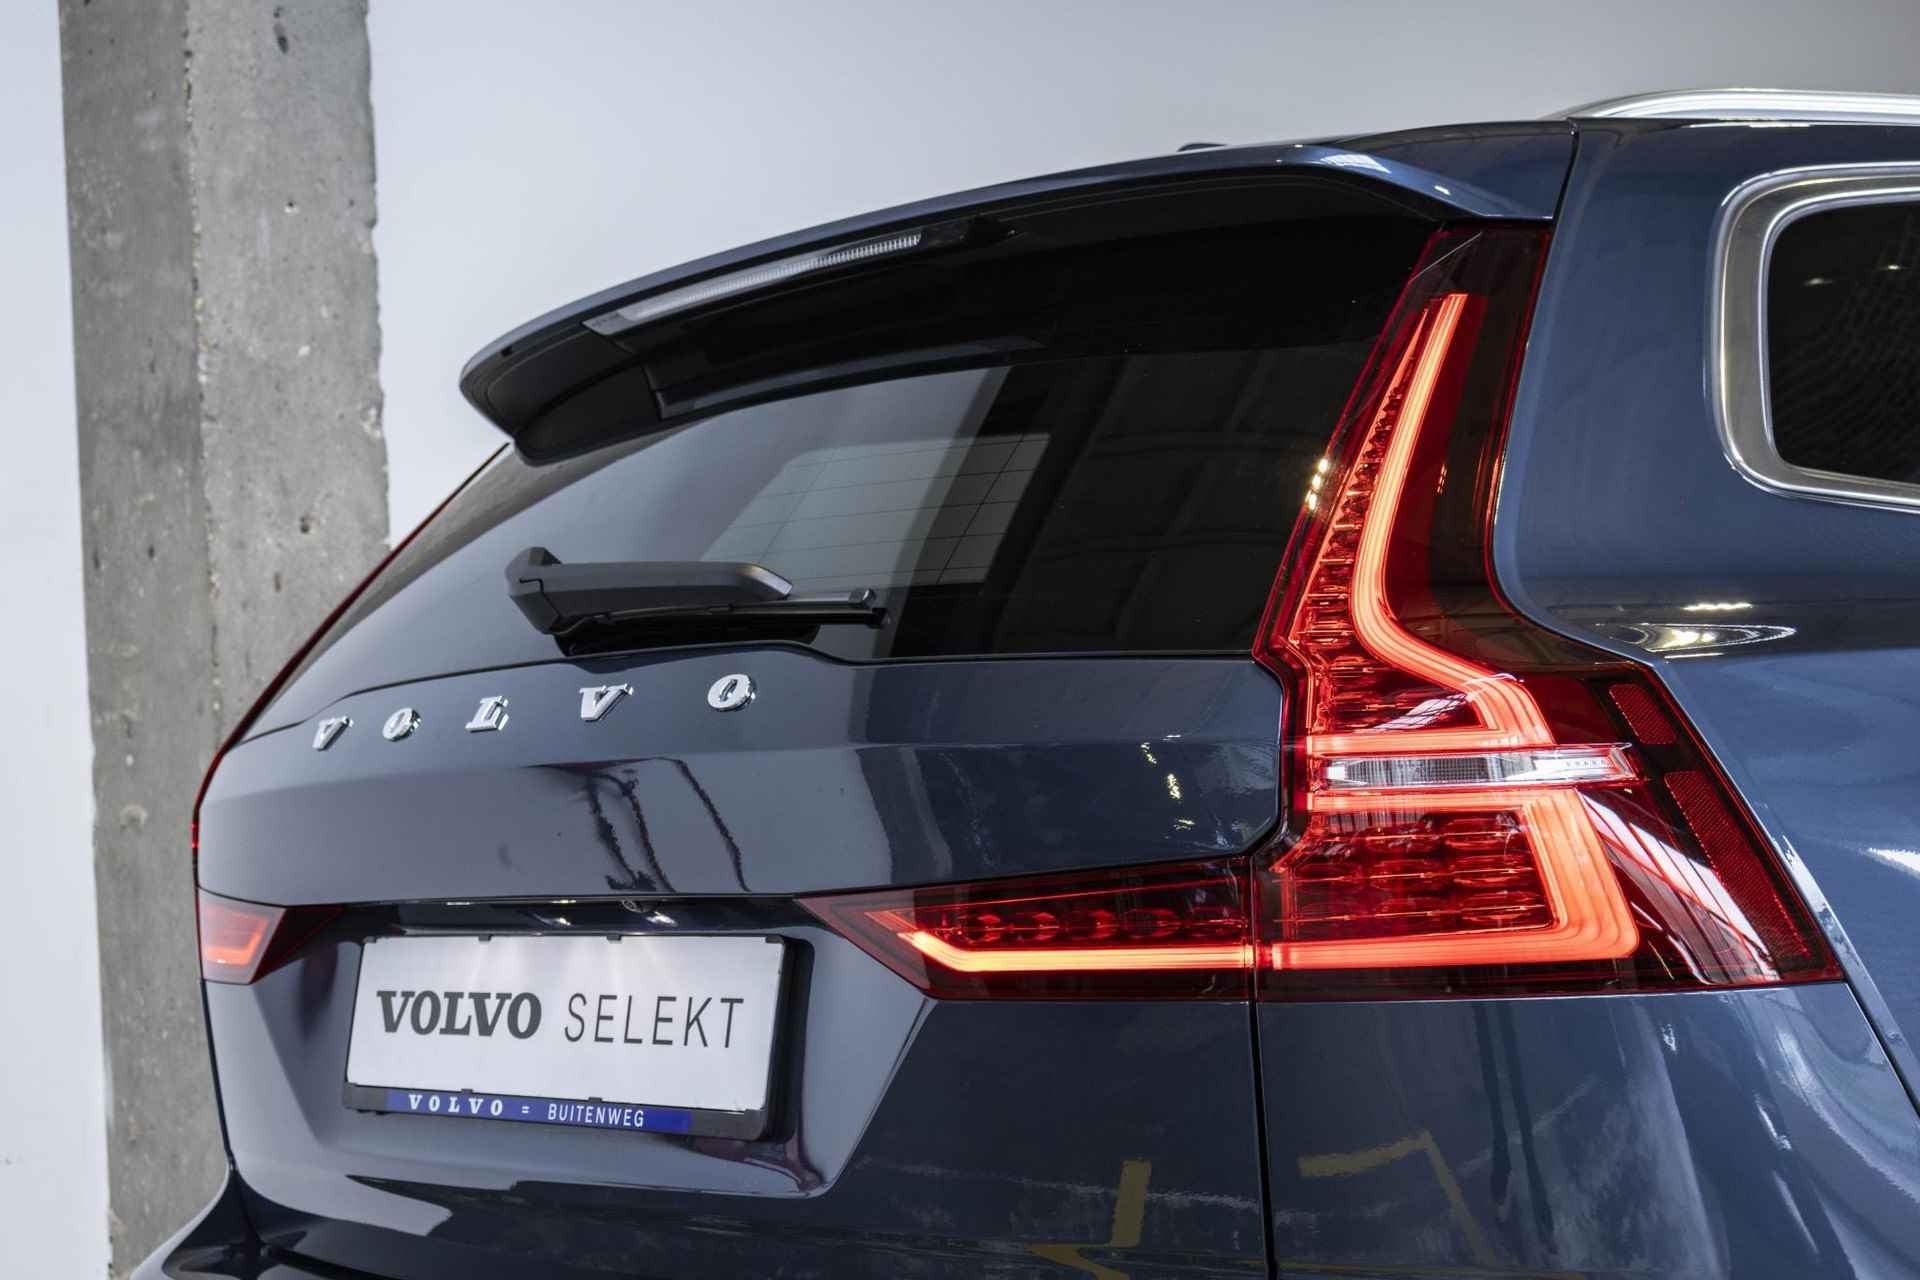 Volvo V60 B4 Automaat Business Pro | Blind Spot | Parkeercamera | Park Assist voor en achter | Adaptive cruise control | Extra getint glas | Keyless entree - 15/40